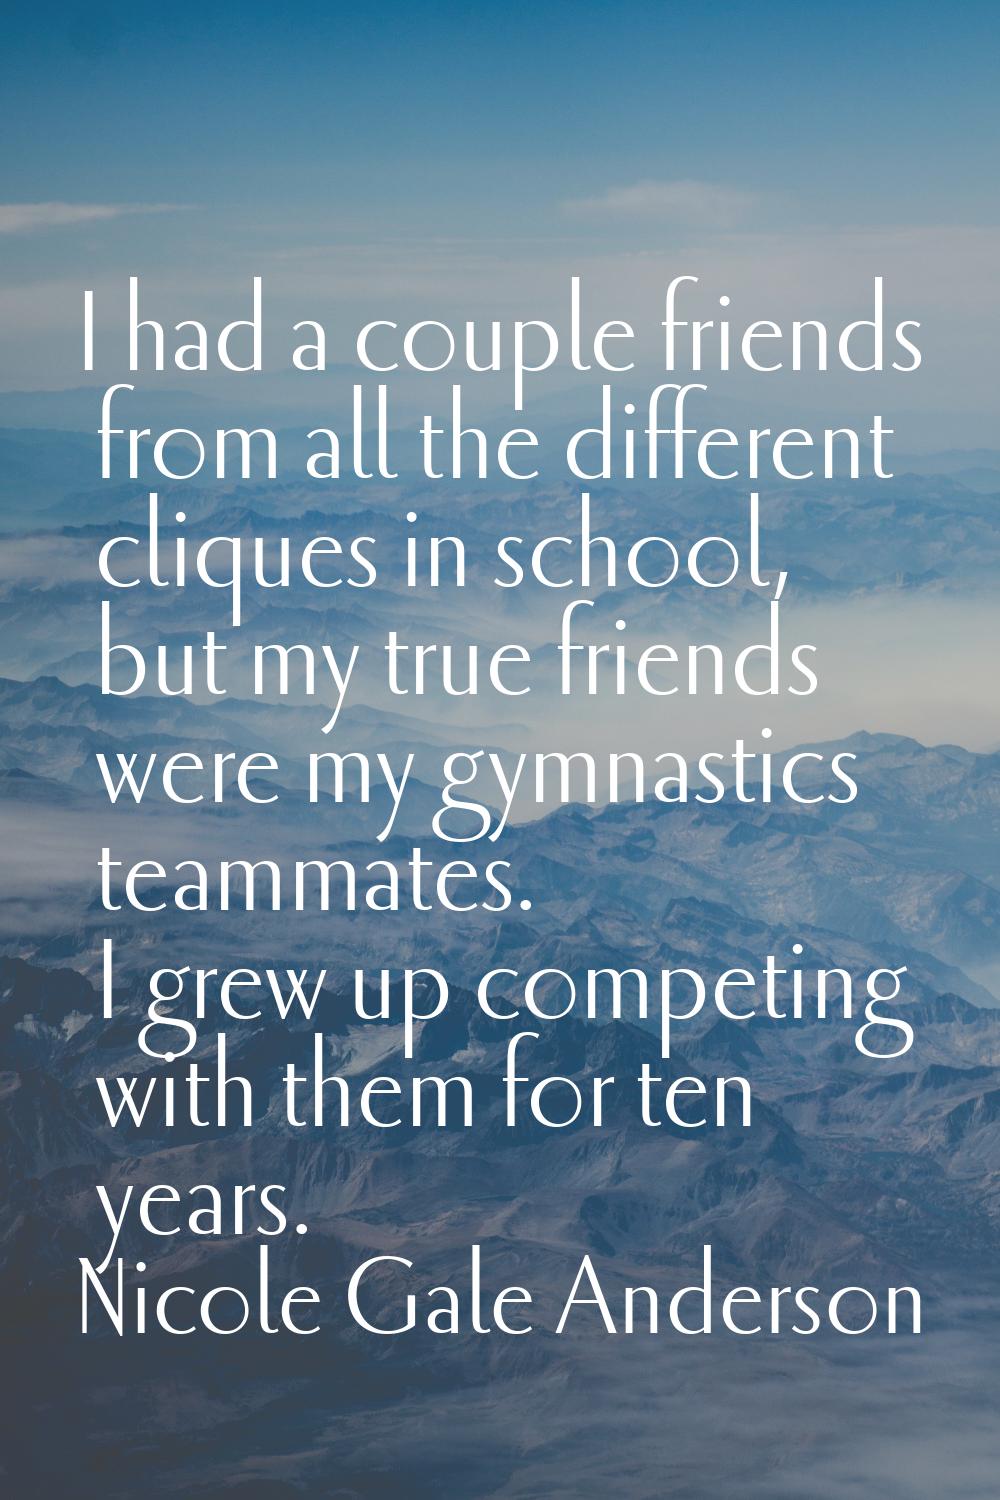 I had a couple friends from all the different cliques in school, but my true friends were my gymnas